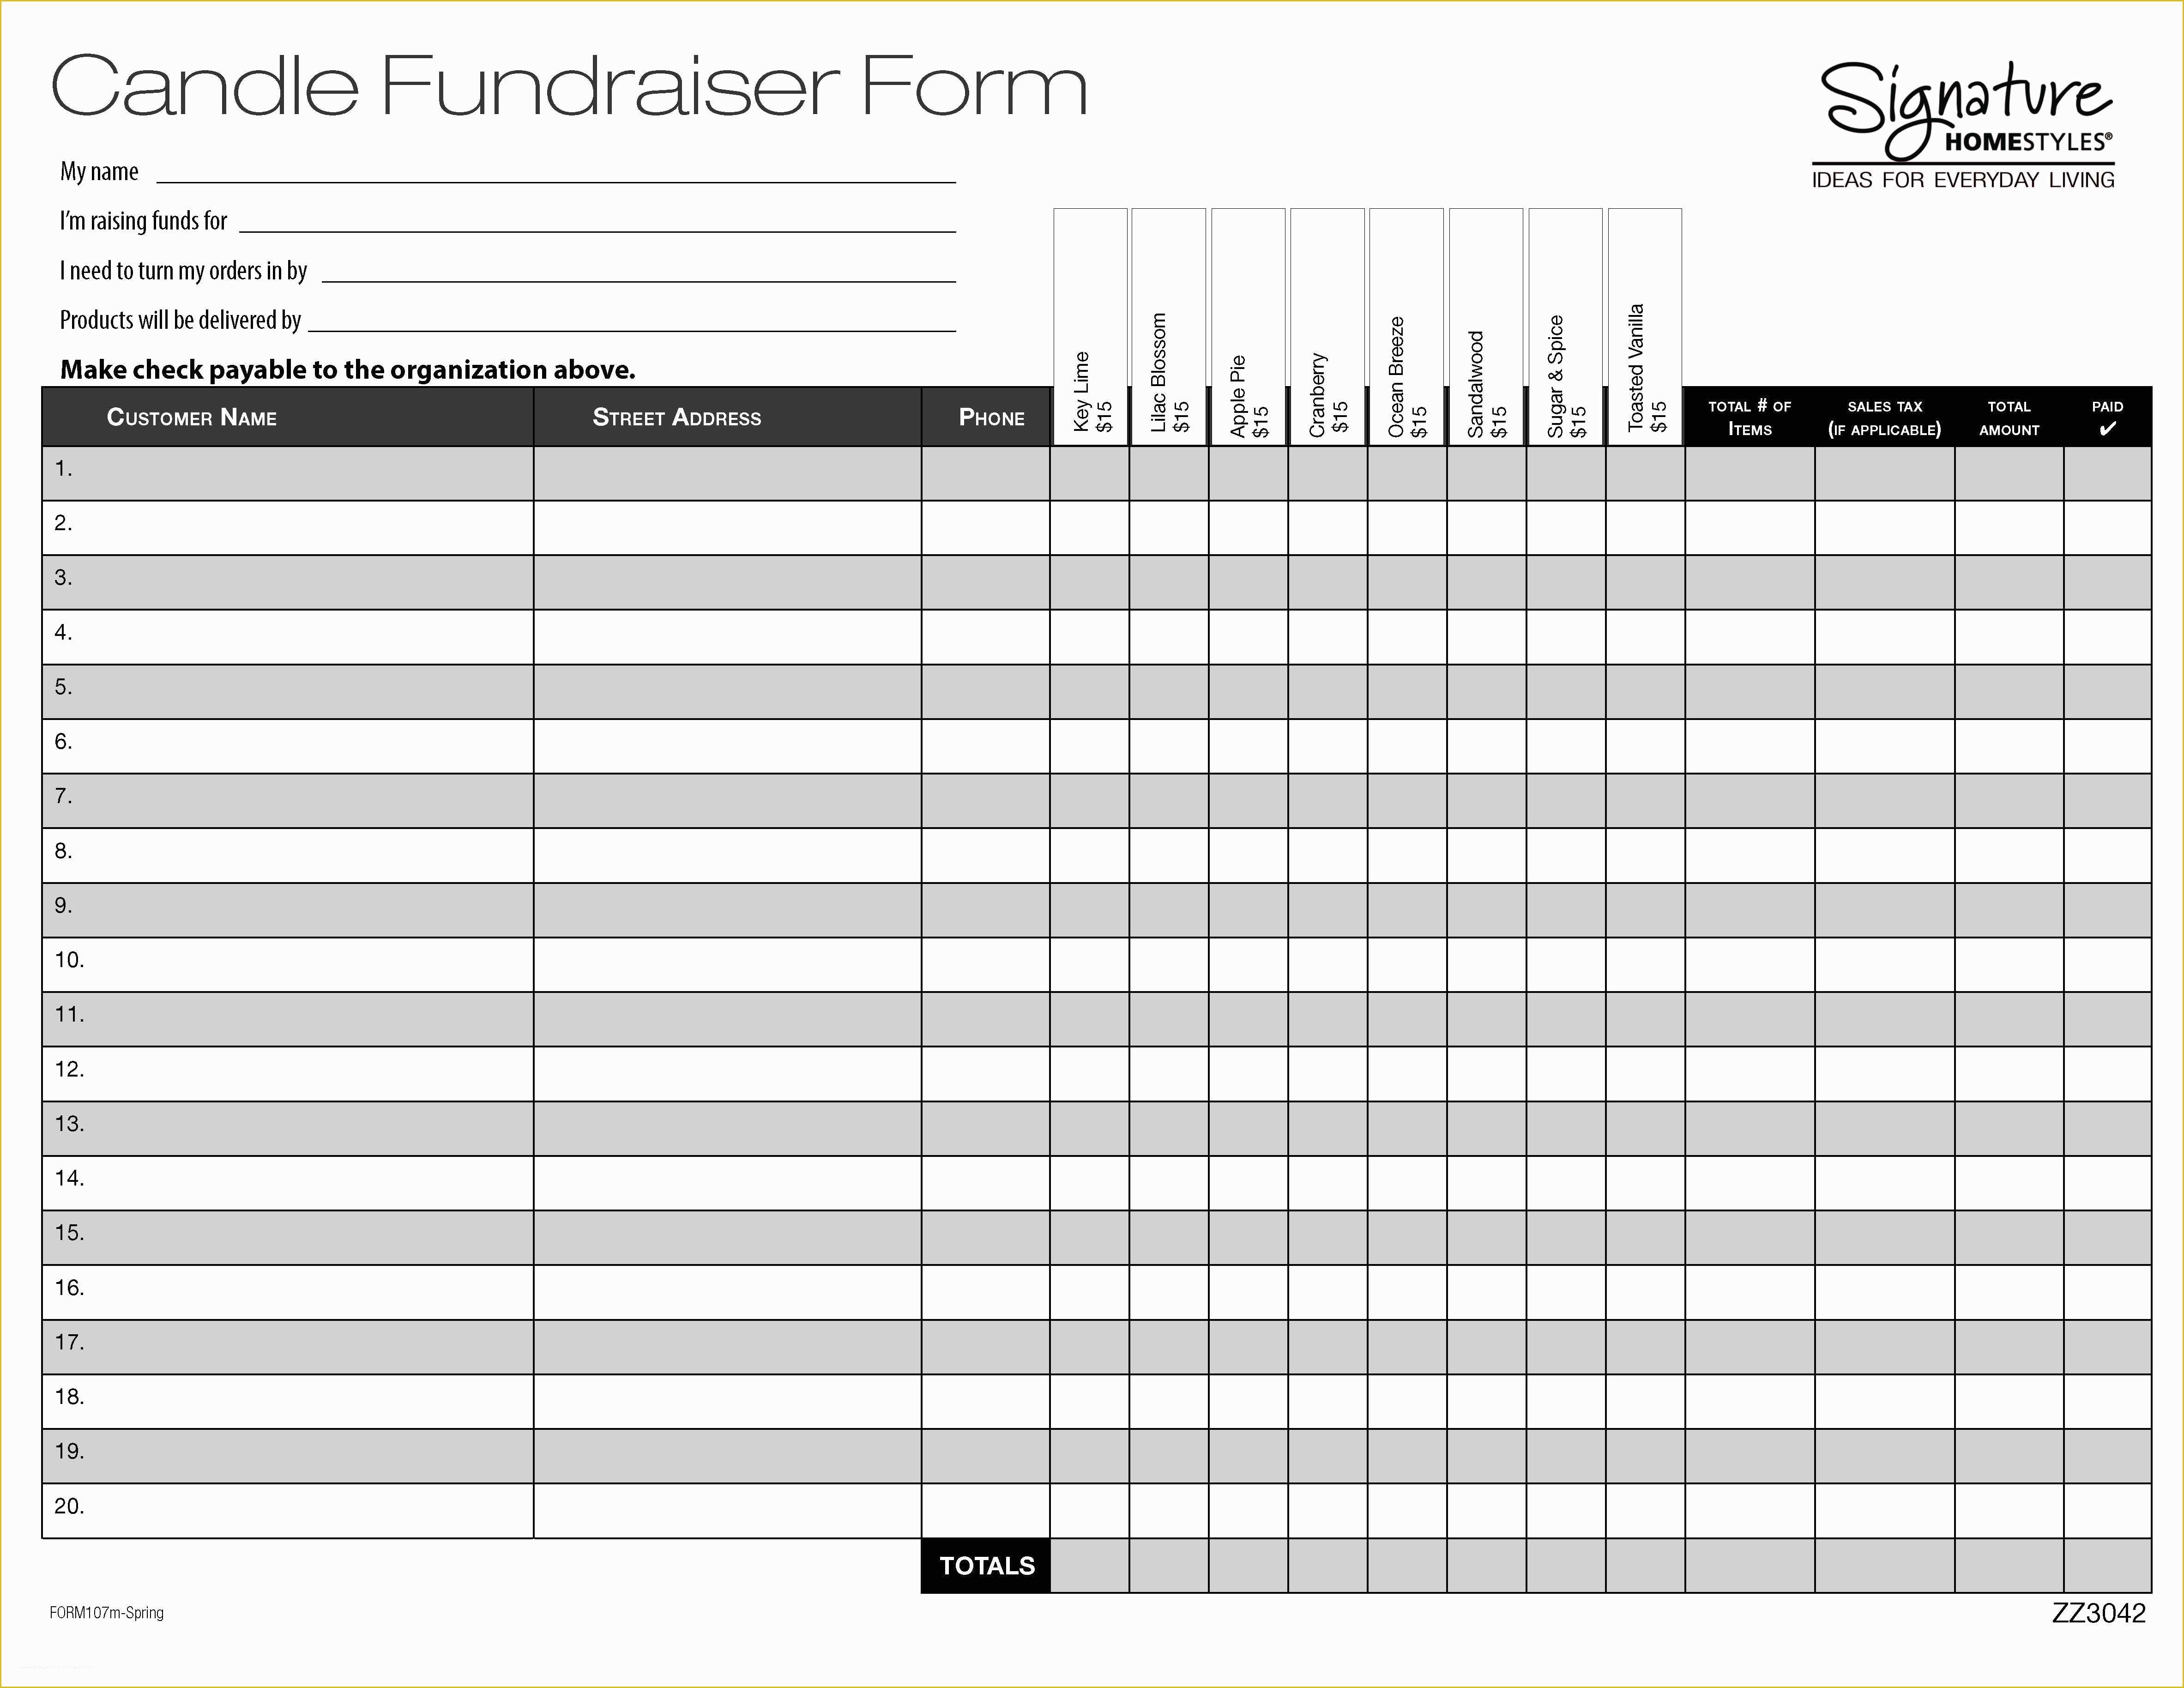 candle-fundraiser-order-form-template